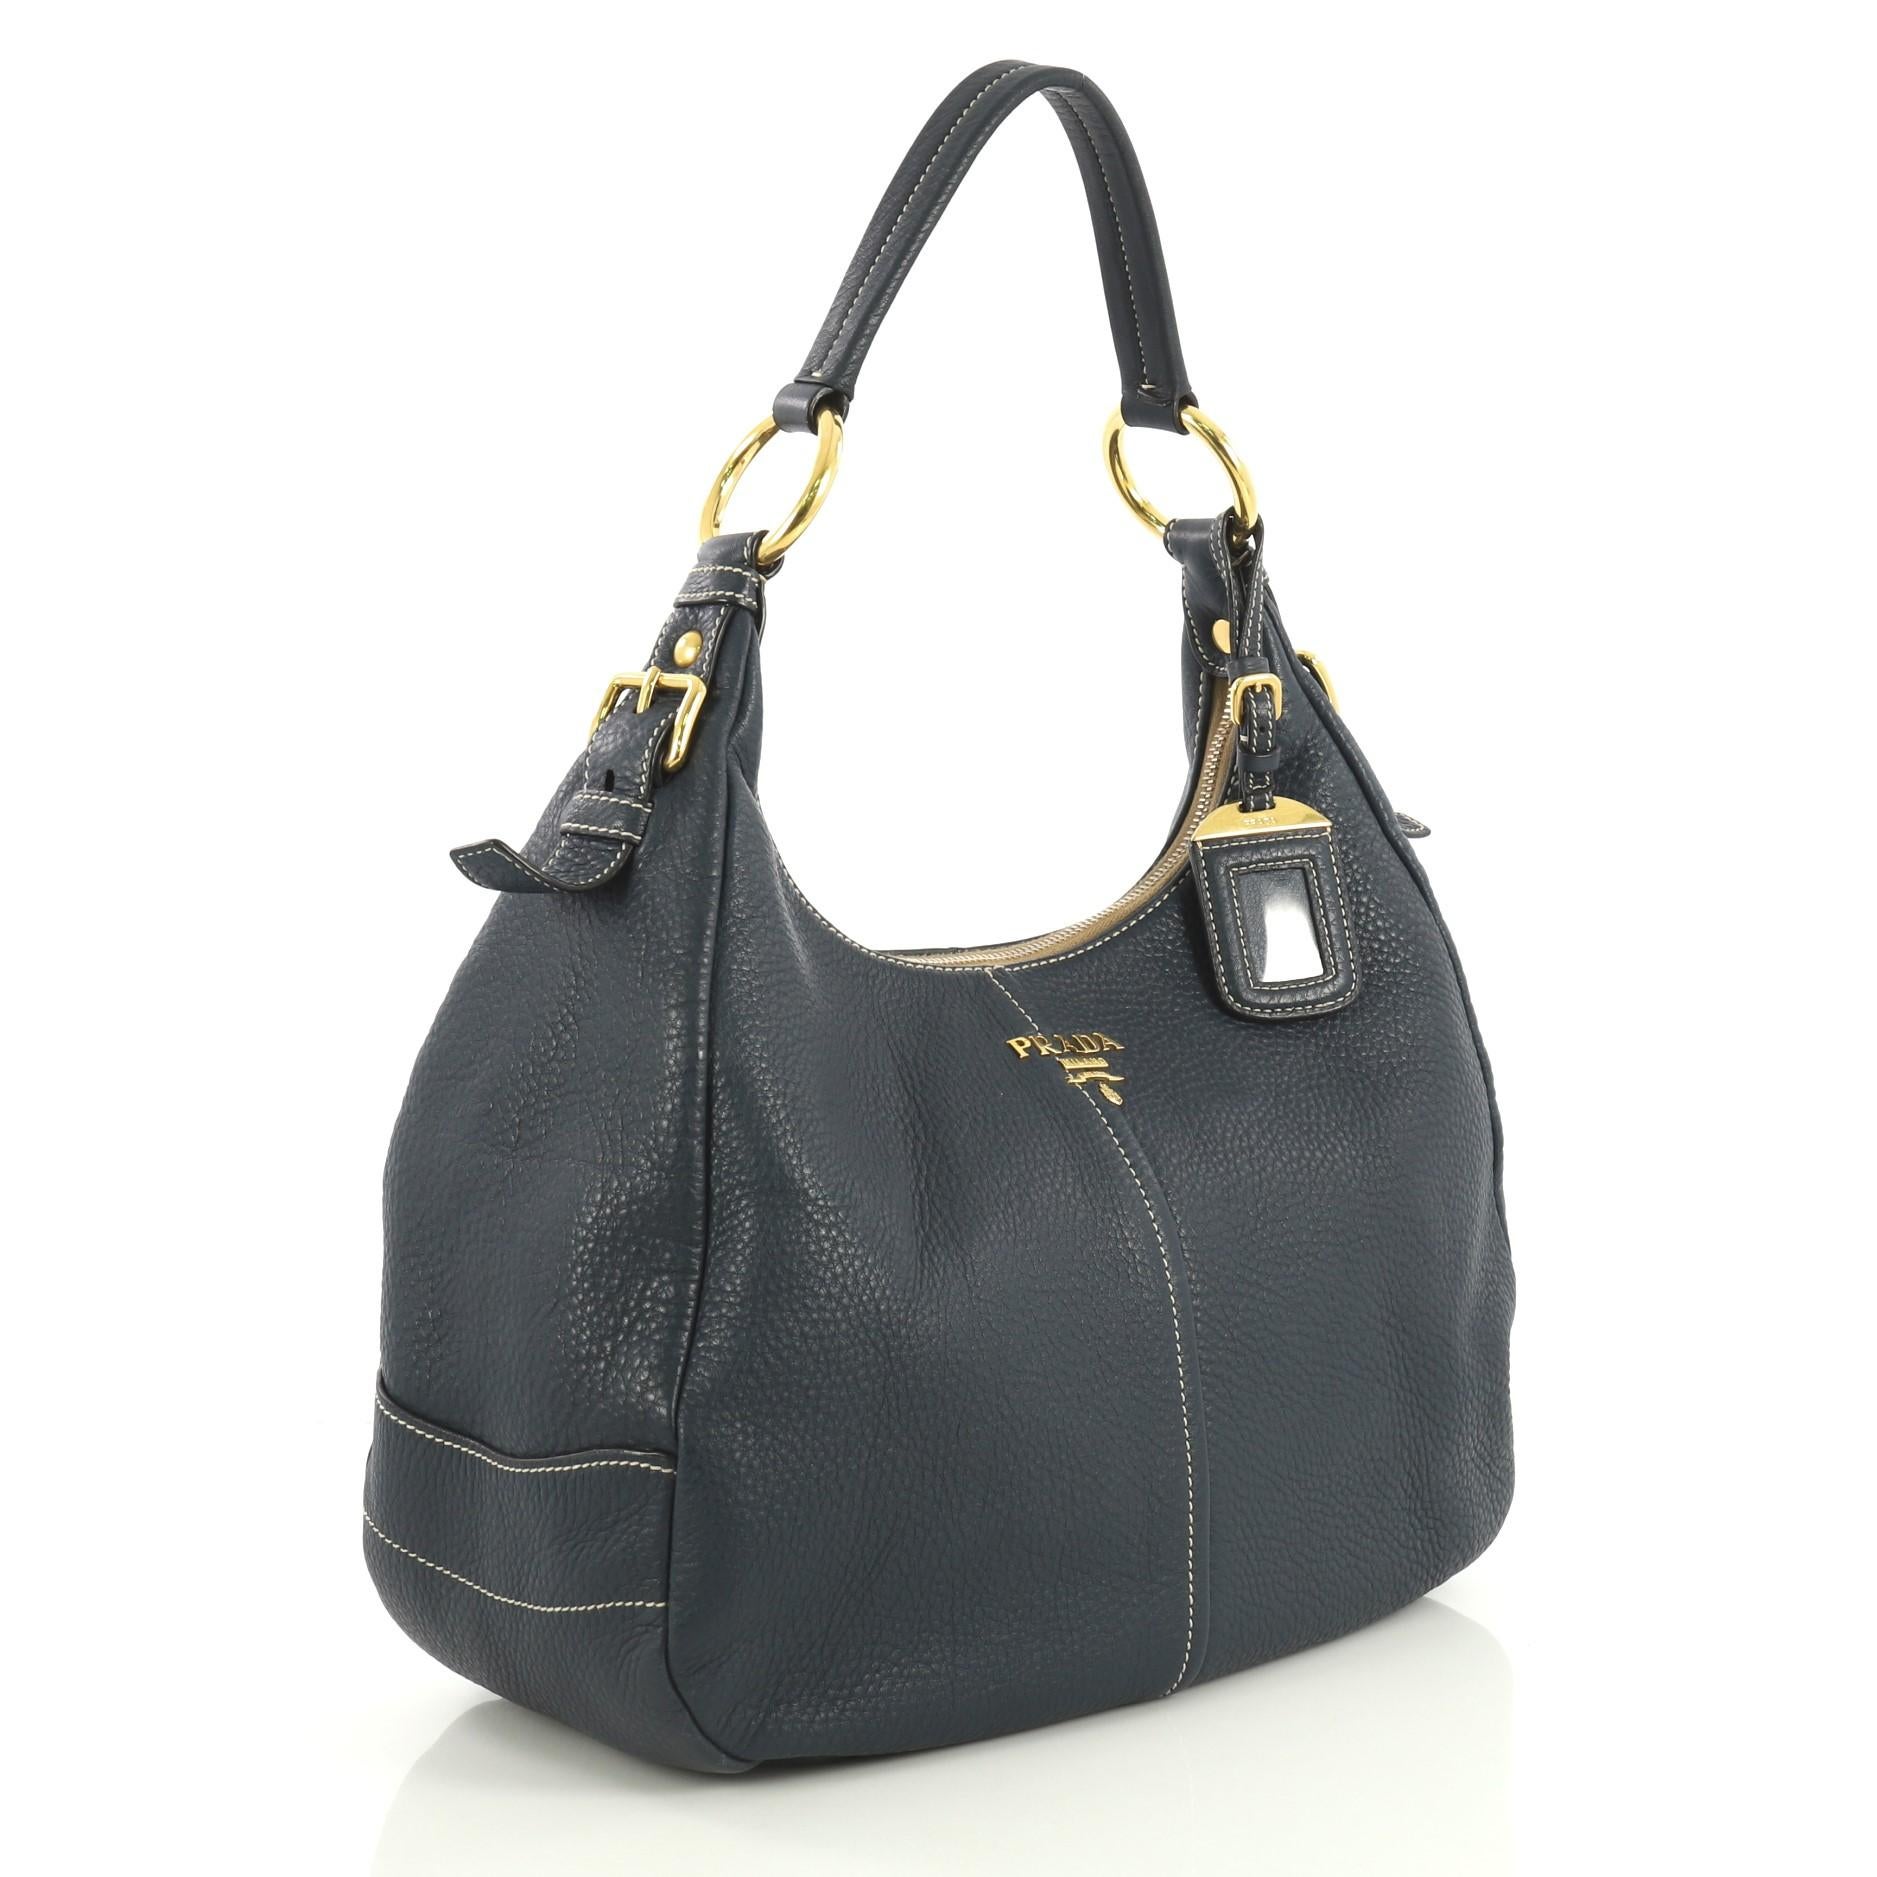 This Prada Zip Top Hobo Vitello Daino Medium, crafted from blue vitello daino leather, features a flat leather handle, raised Prada logo and gold-tone hardware. Its zip closure opens to a gold fabric interior with zip and snap pockets. 

Estimated